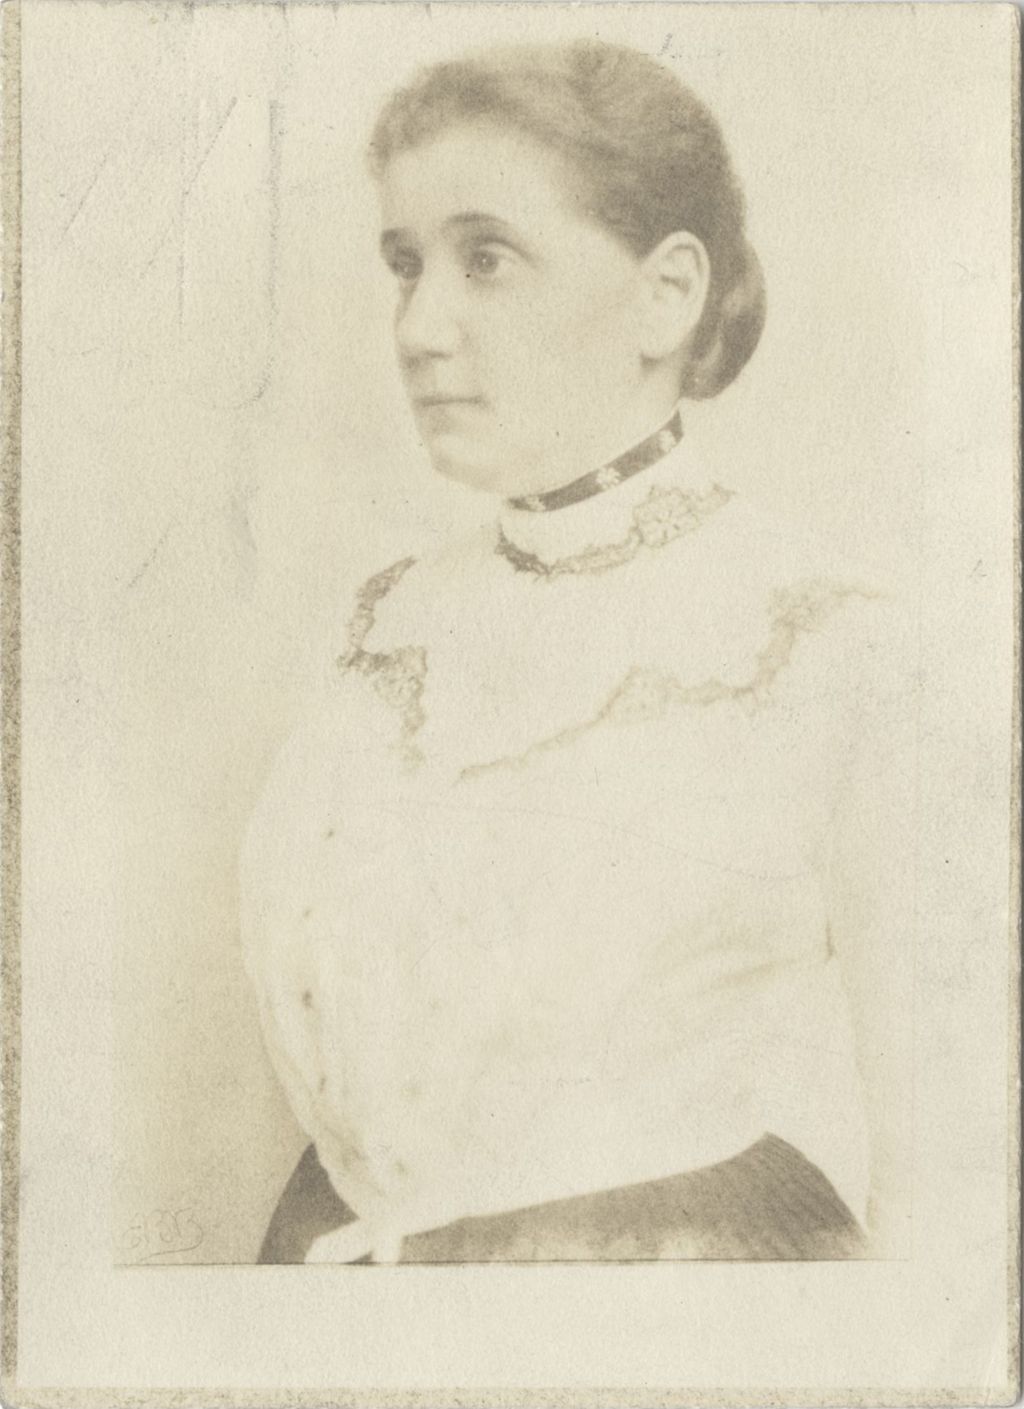 Miniature of Waist-up 3/4 portrait of Jane Addams wearing a high-necked light colored blouse